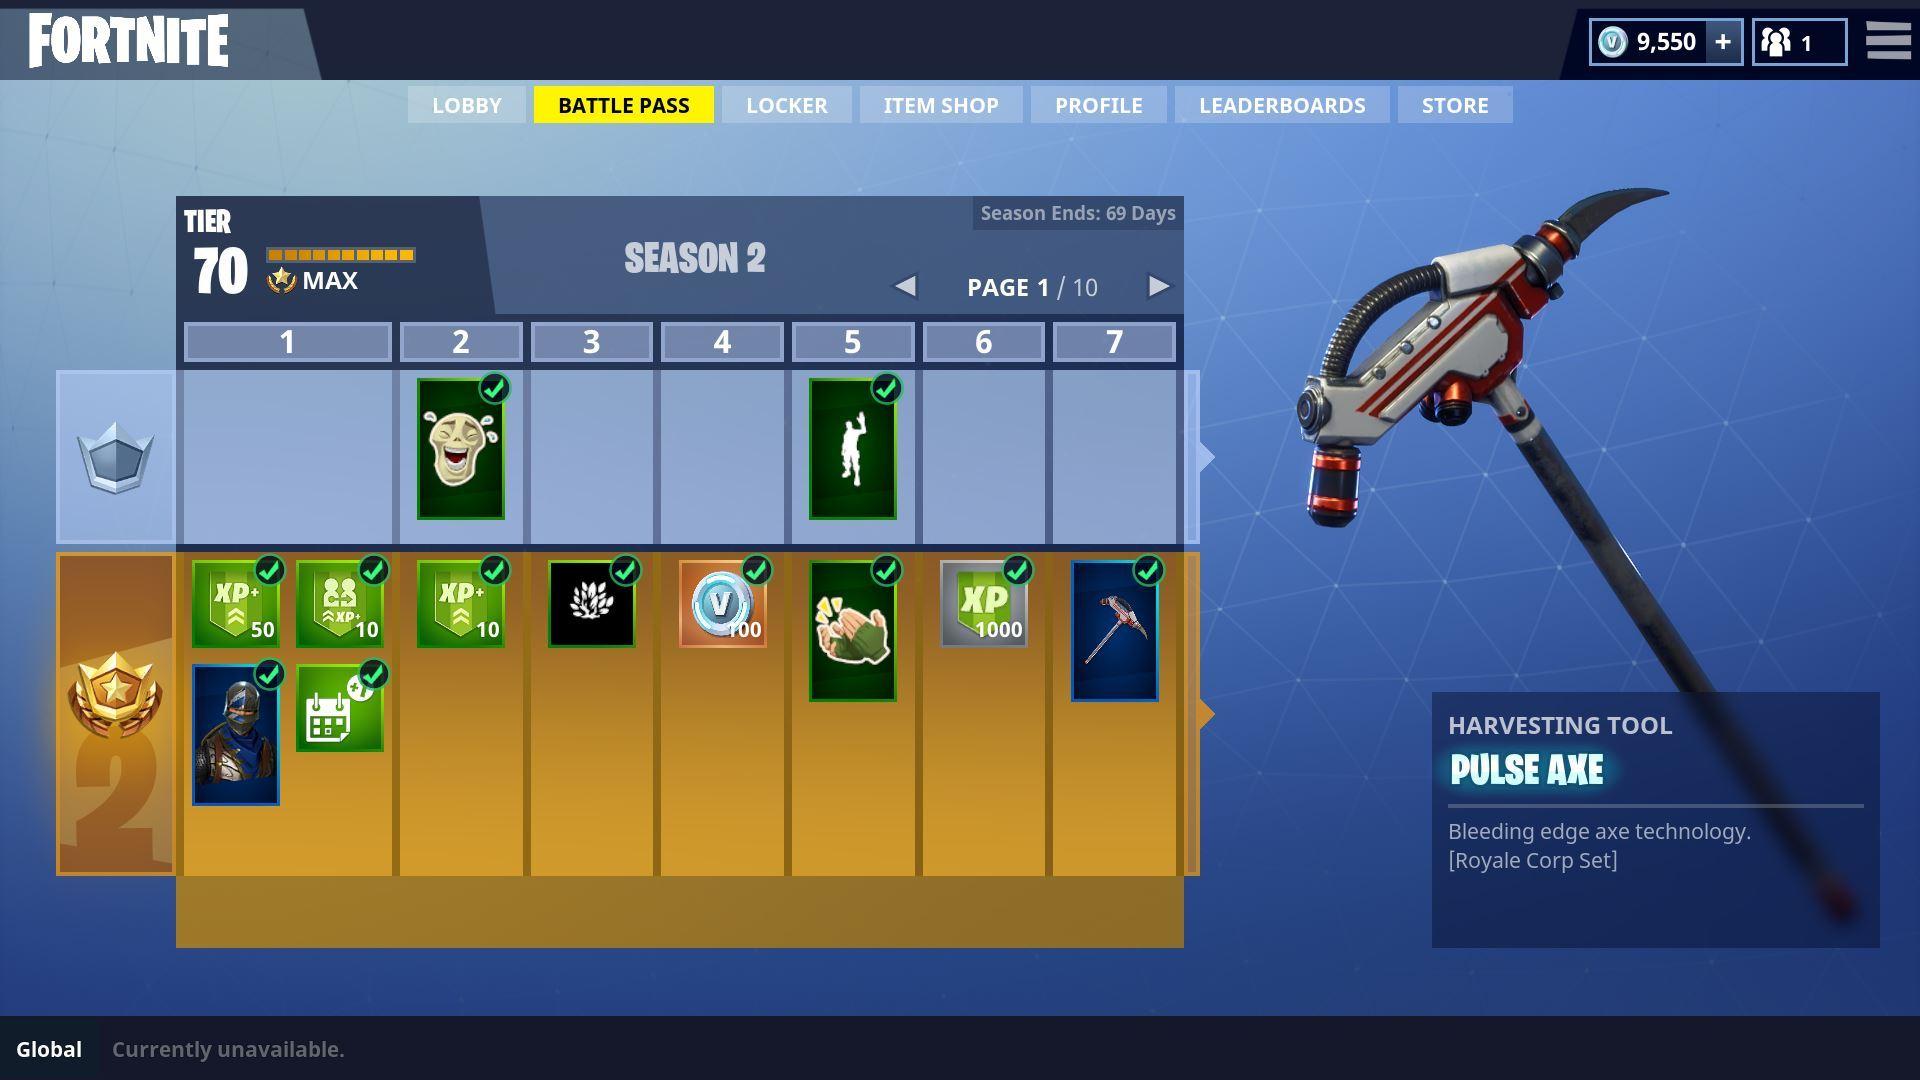 Fortnite: What is a Battle Pass and how do you get one?